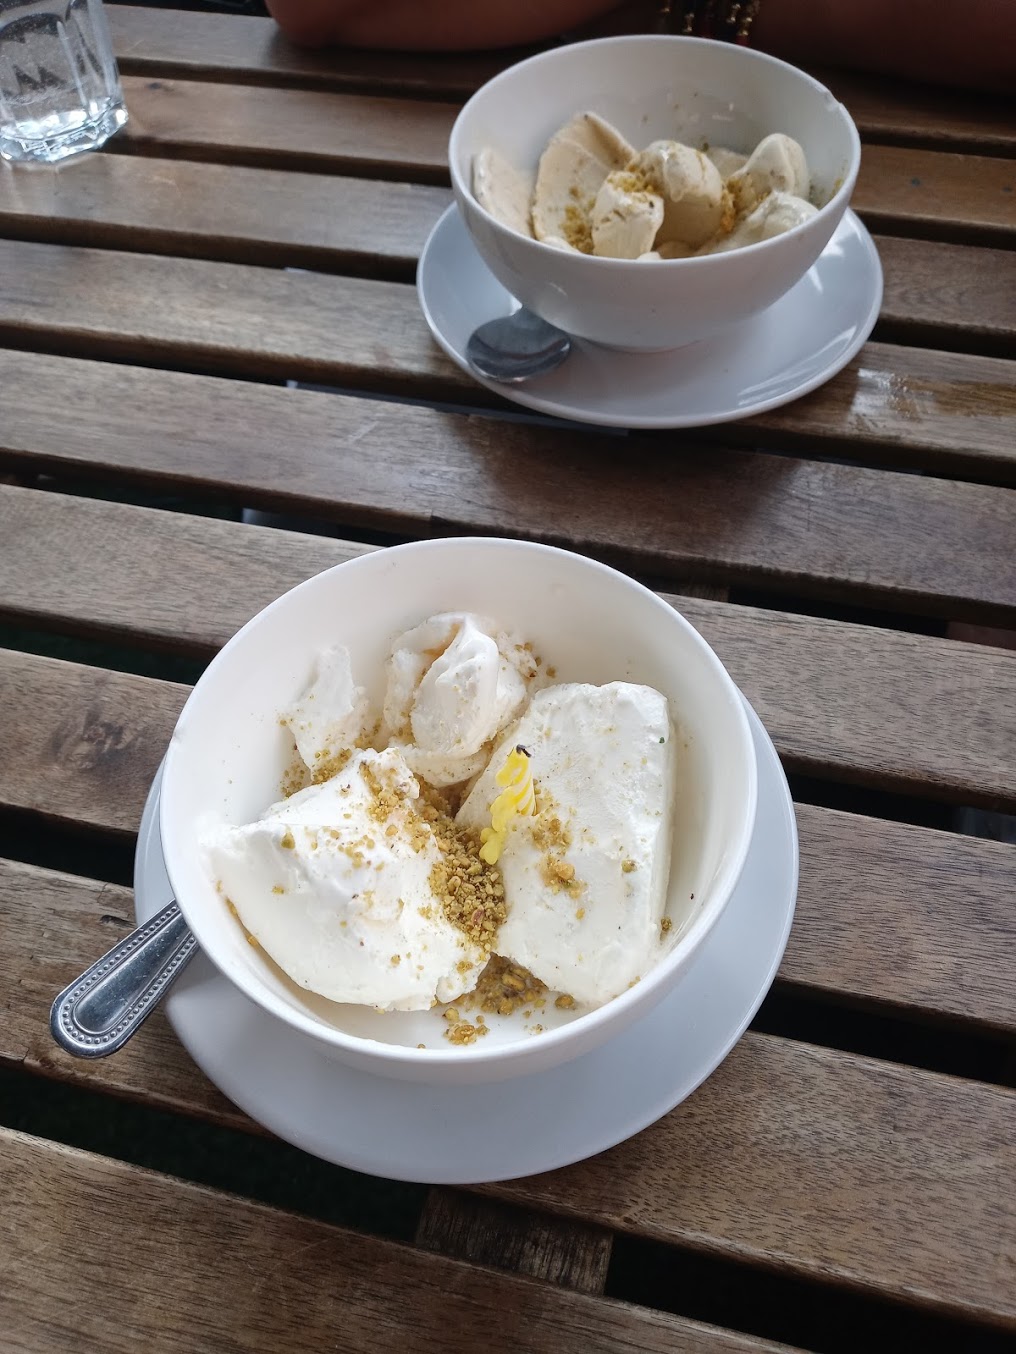 Bowls of ice cream on a wooden table